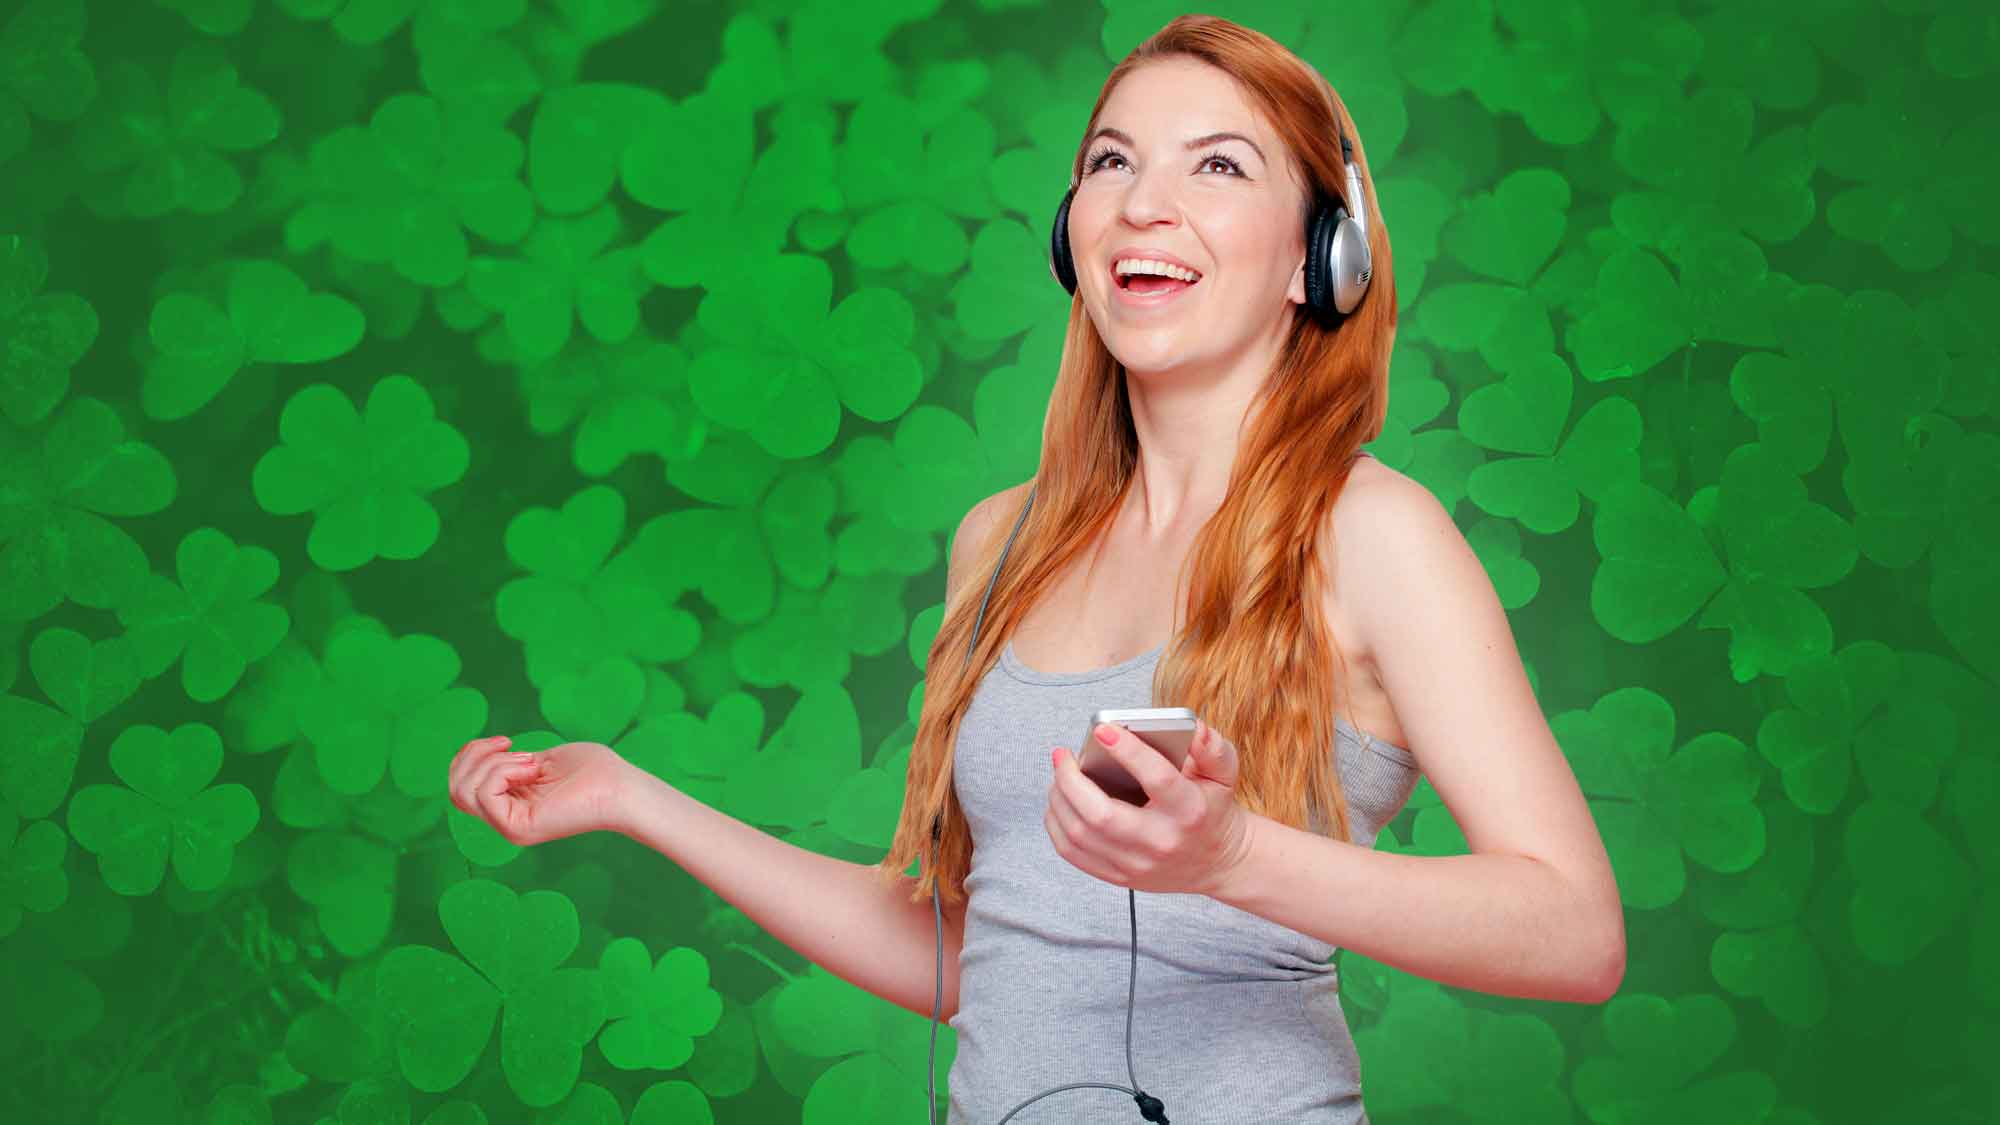 15 Essential Songs For Your St. Patrick's Day Playlist